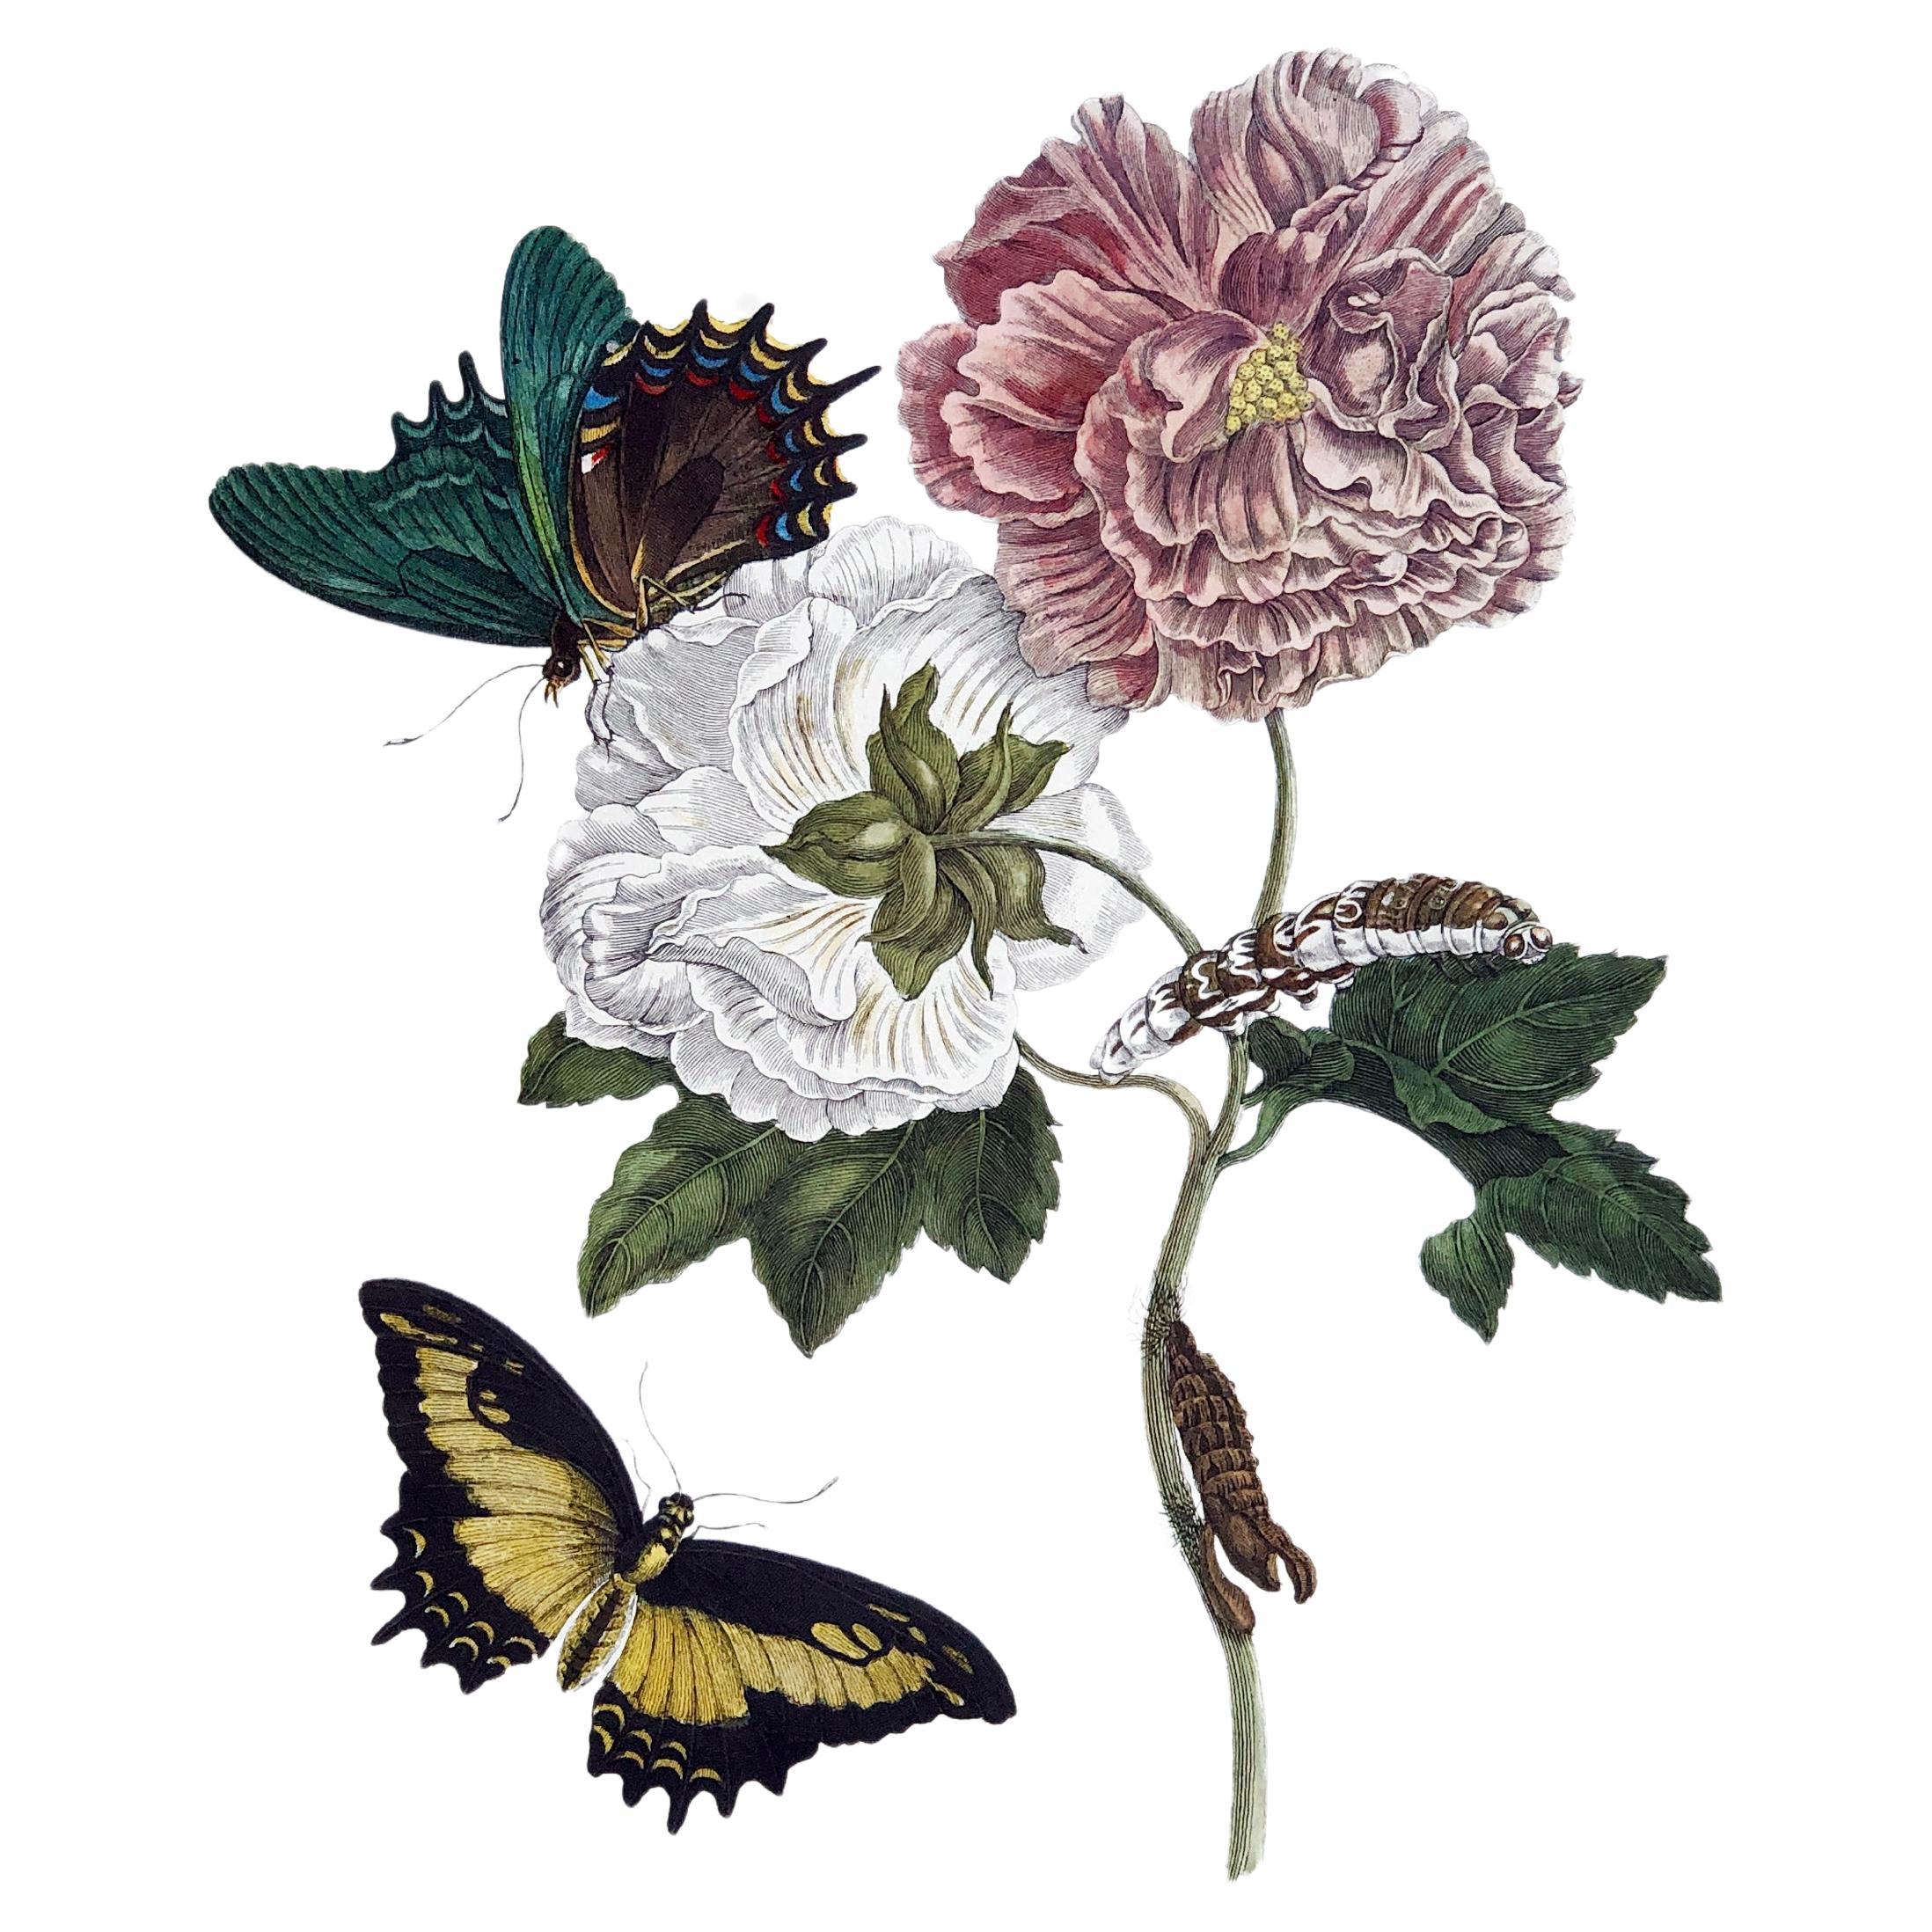 Maria Sibylla Merian - P. Sluyter - Hibiscus flowers and swallowtail Nr.31 For Sale